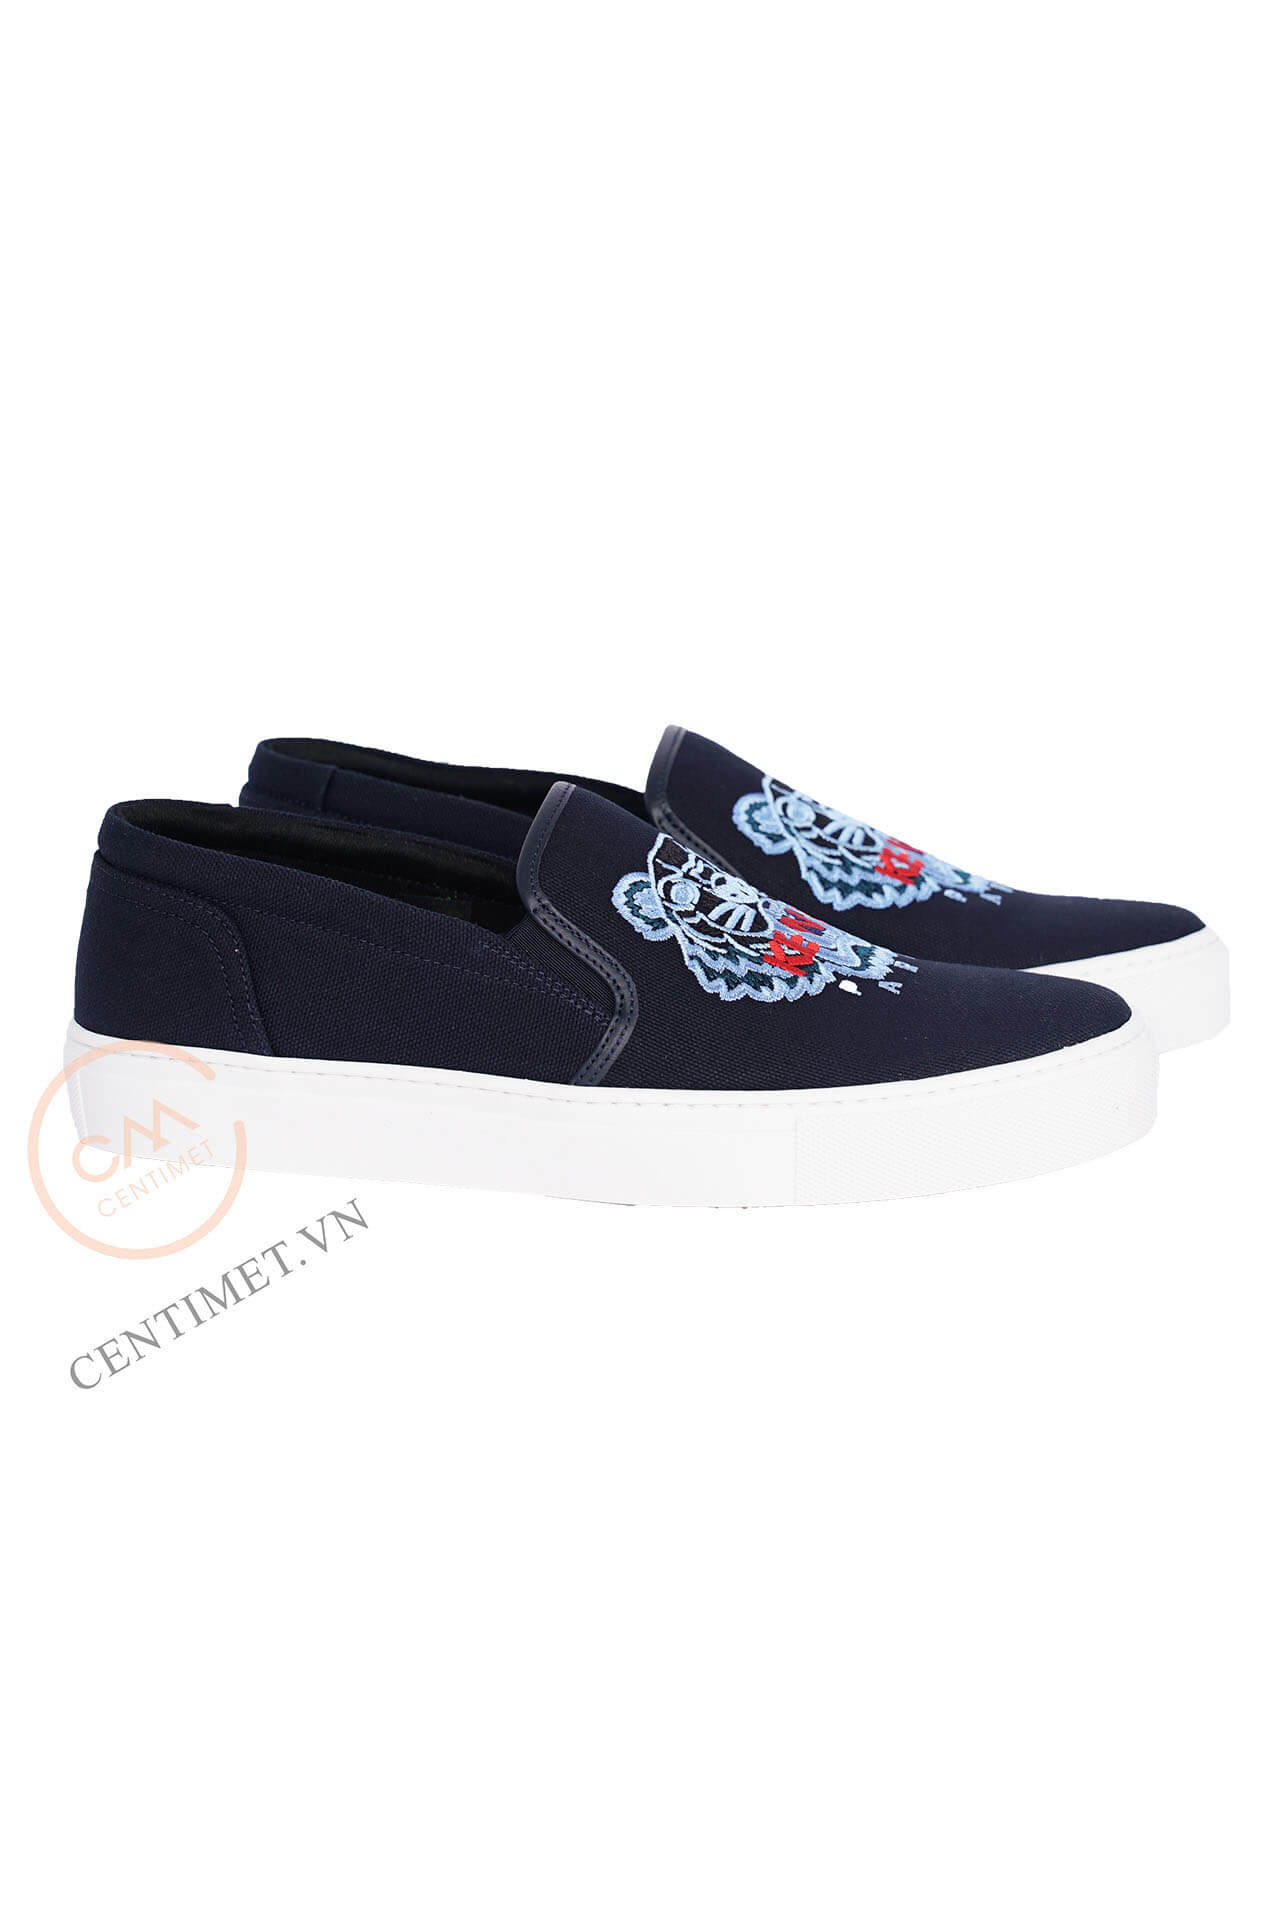 KENZO Tiger Embroidered Slip-On Sneakers